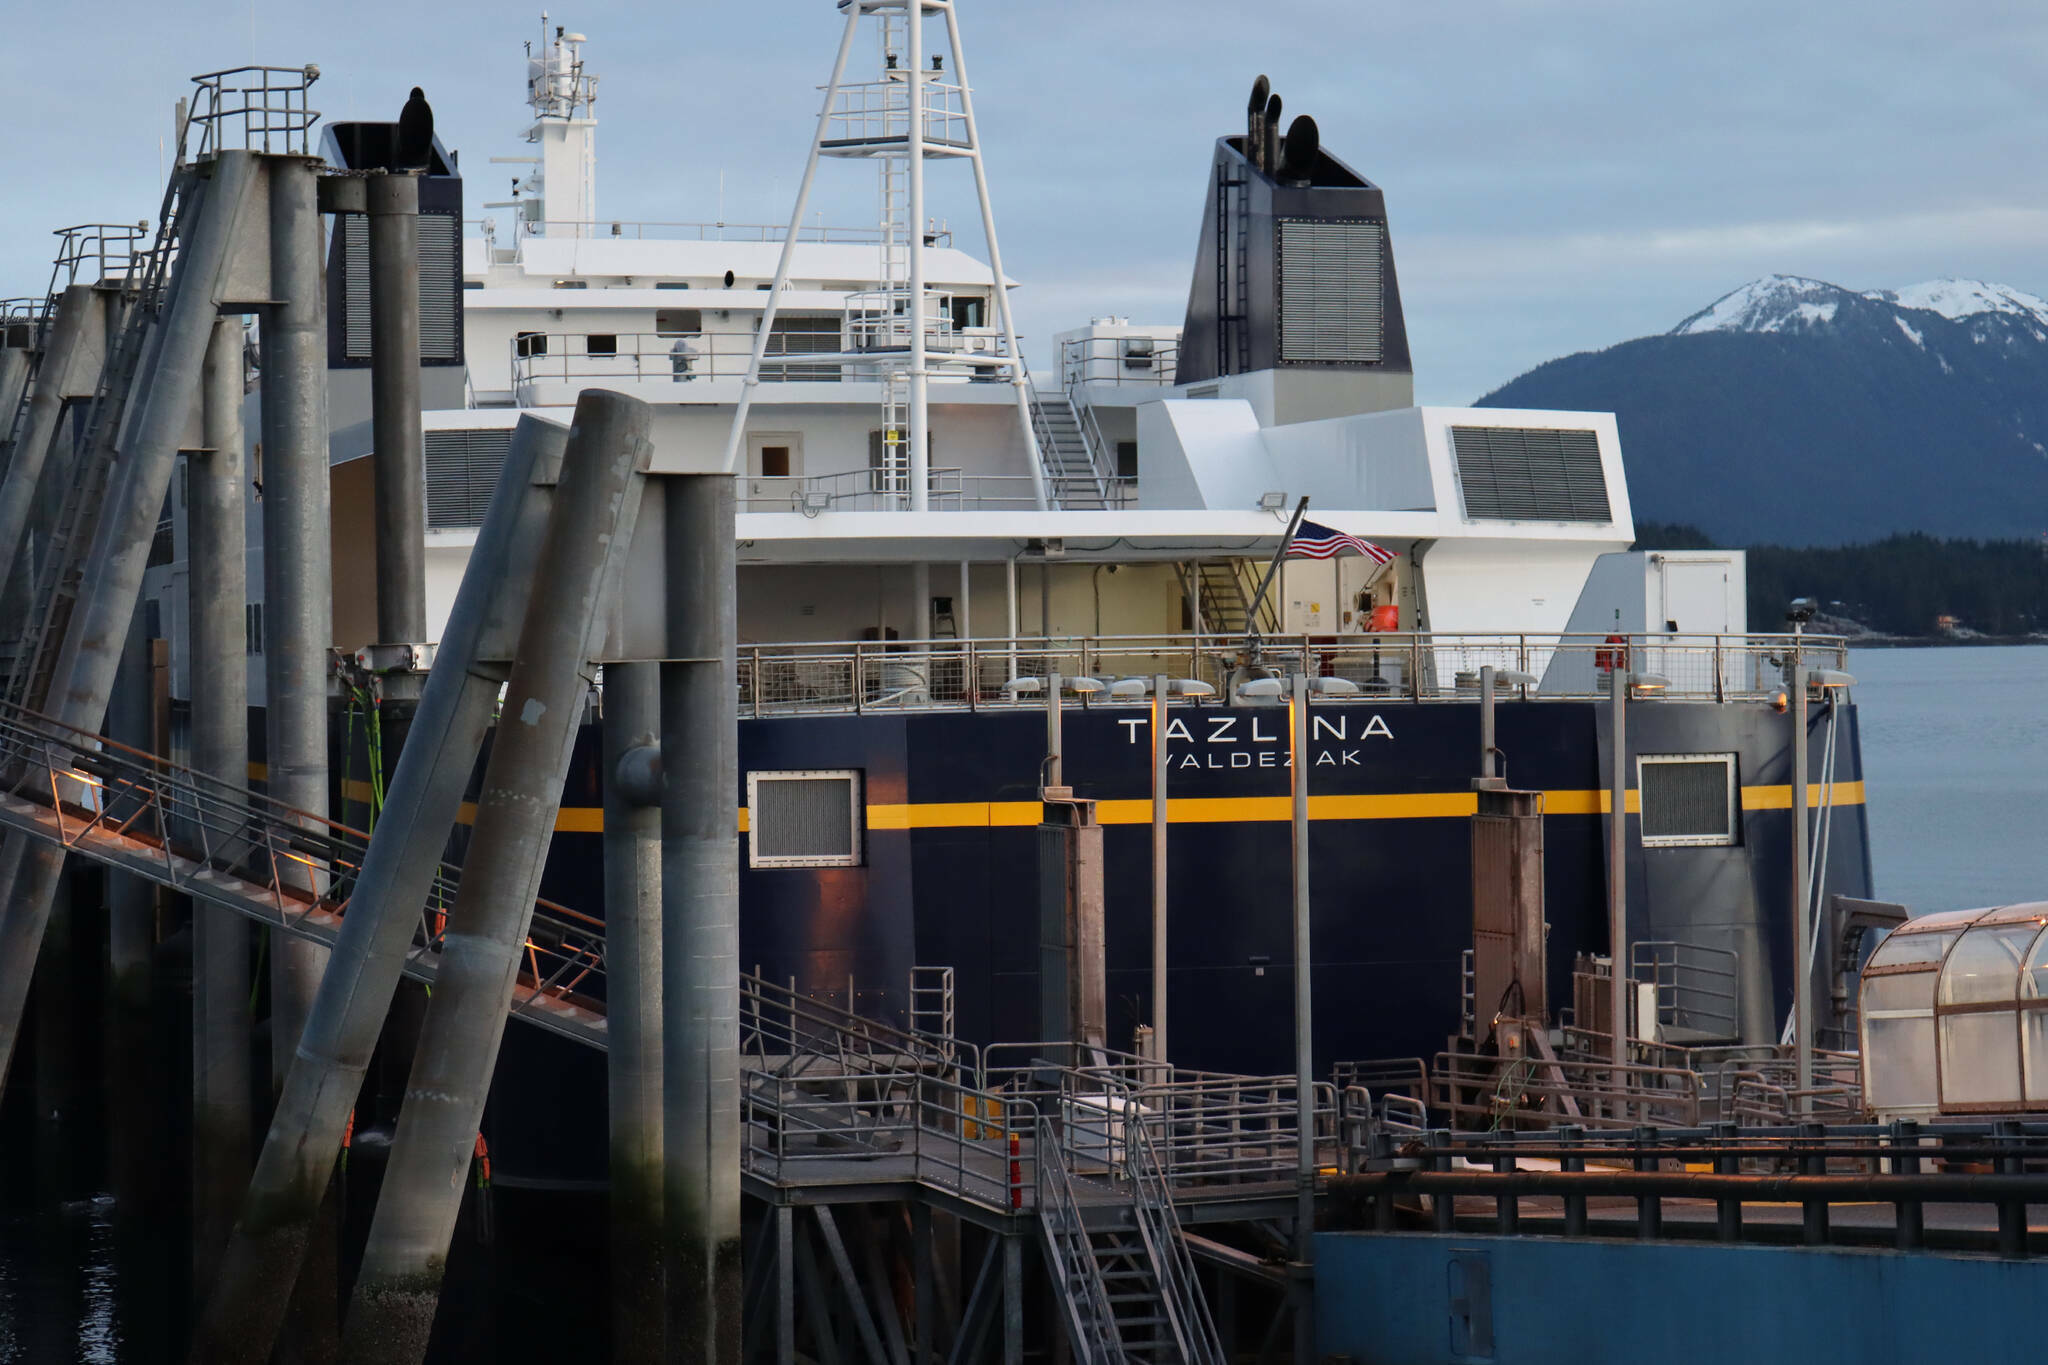 The Tazlina is docked at the Auke Bay ferry terminal in this November 2021 photo. Both the vessel and terminal are scheduled to get upgrades from federal grants that will be matched with “toll funds” from ferry revenues. (Ben Hohenstatt / Juneau Empire file photo)